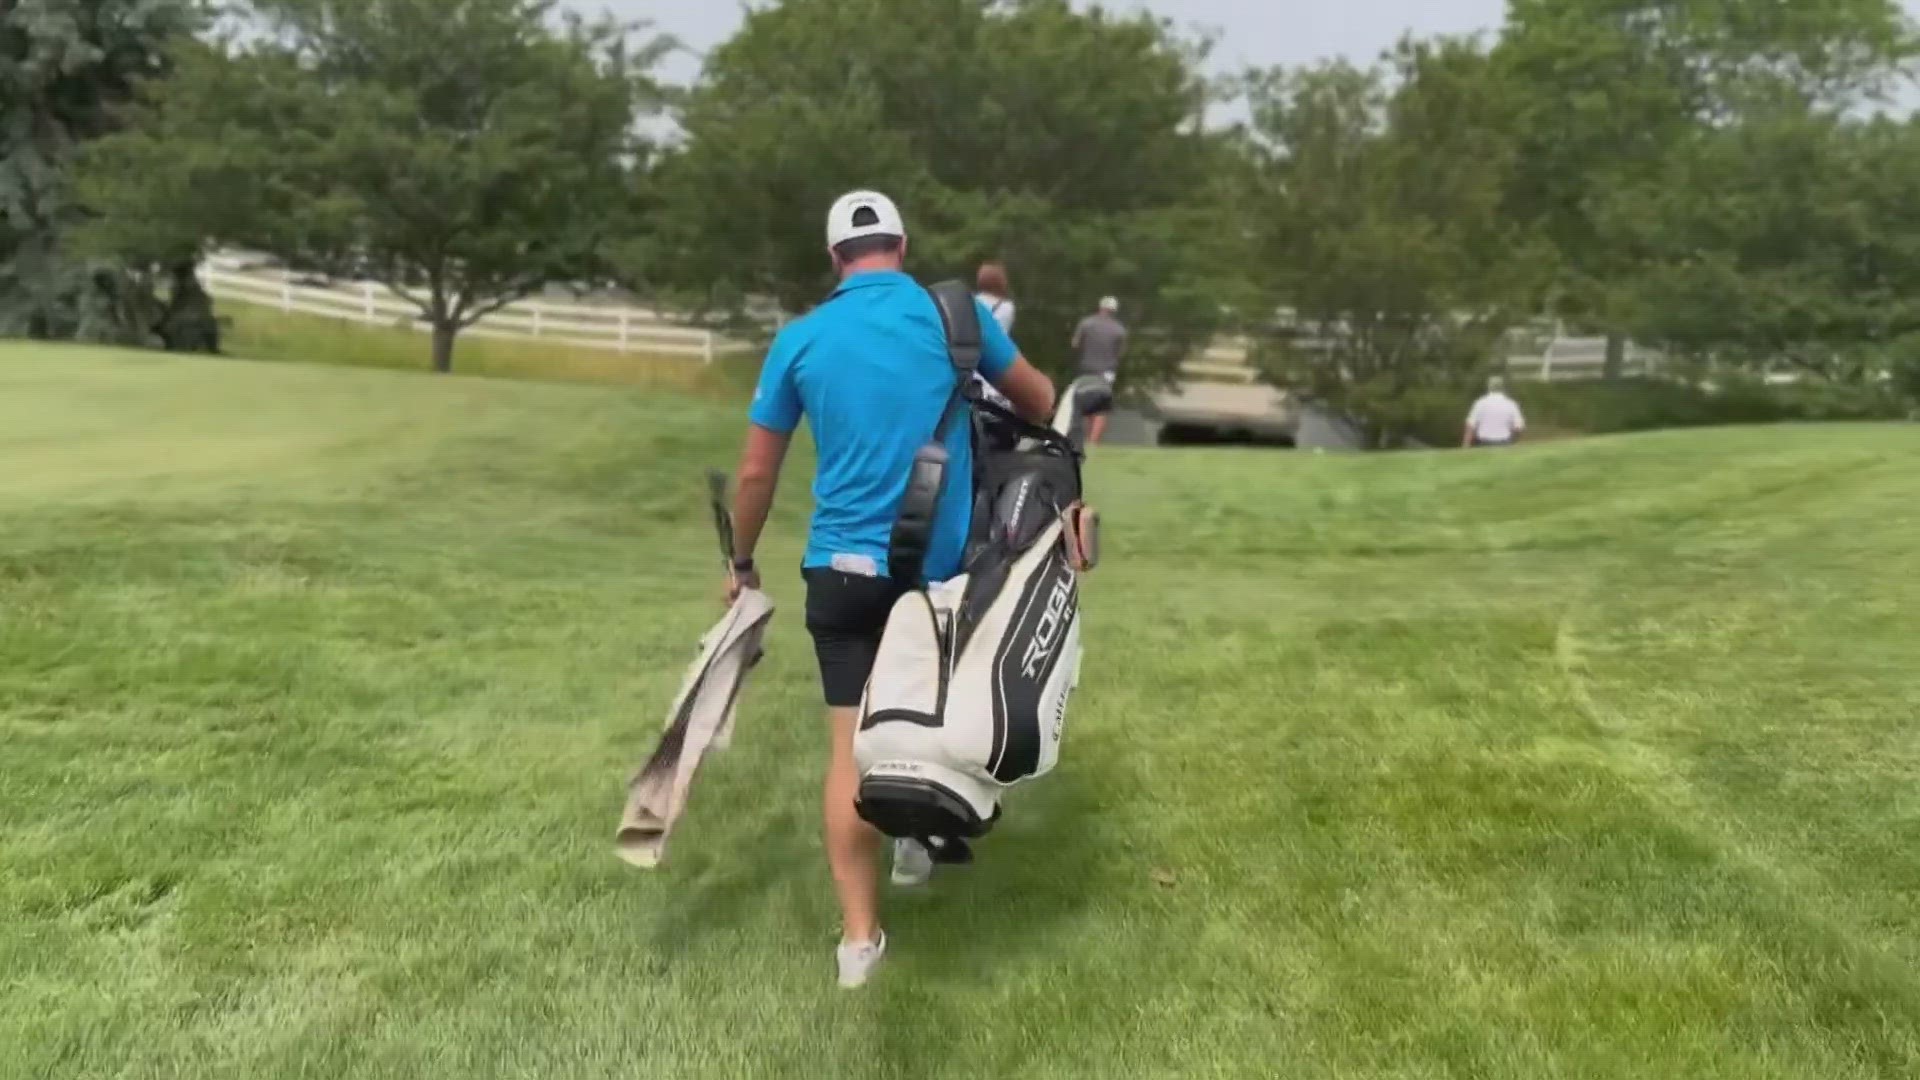 Less than 24 hours after winning the Memorial, Viktor Hovland put down the trophy and picked up the bag to caddie for his college teammate in a U.S. Open qualifier.